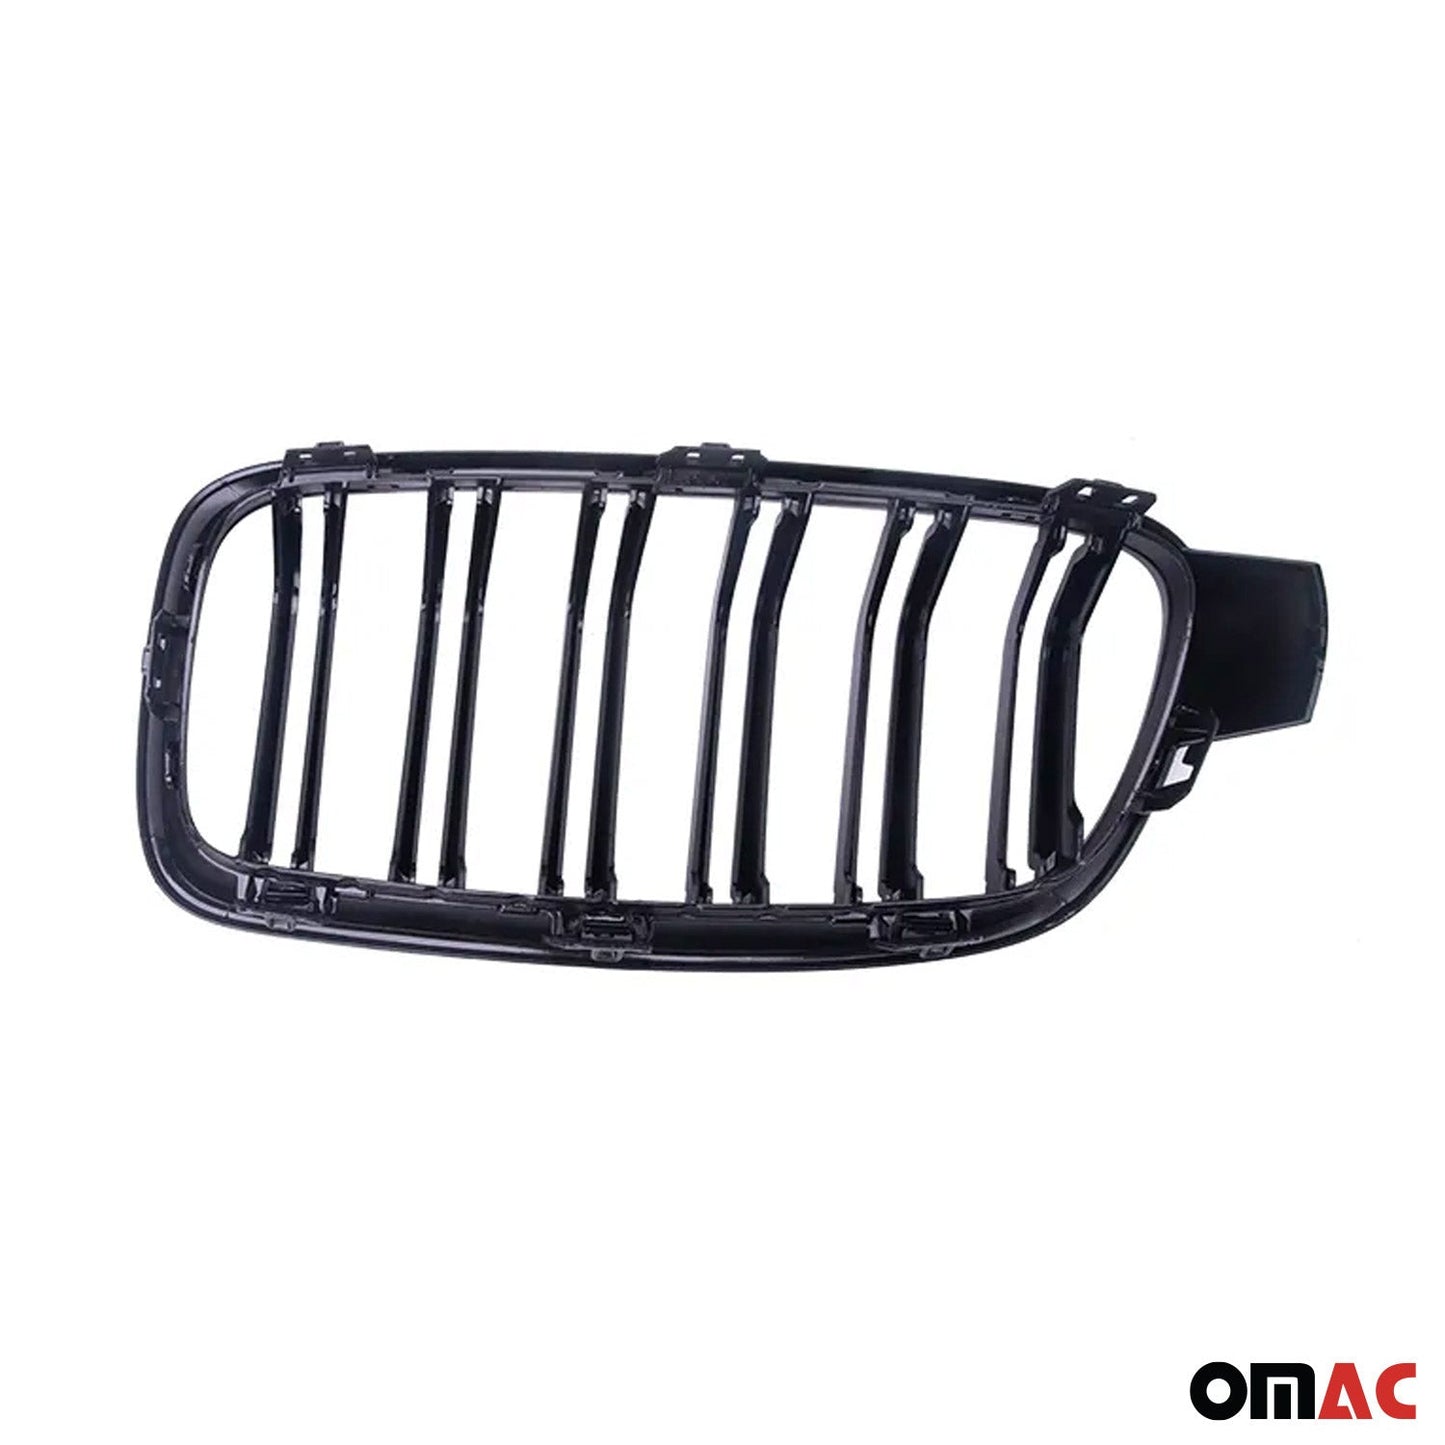 OMAC For BMW 4 Series F32 F33 F36 M4 2013-2017 Front Kidney Grille Gloss Black 1226P081M